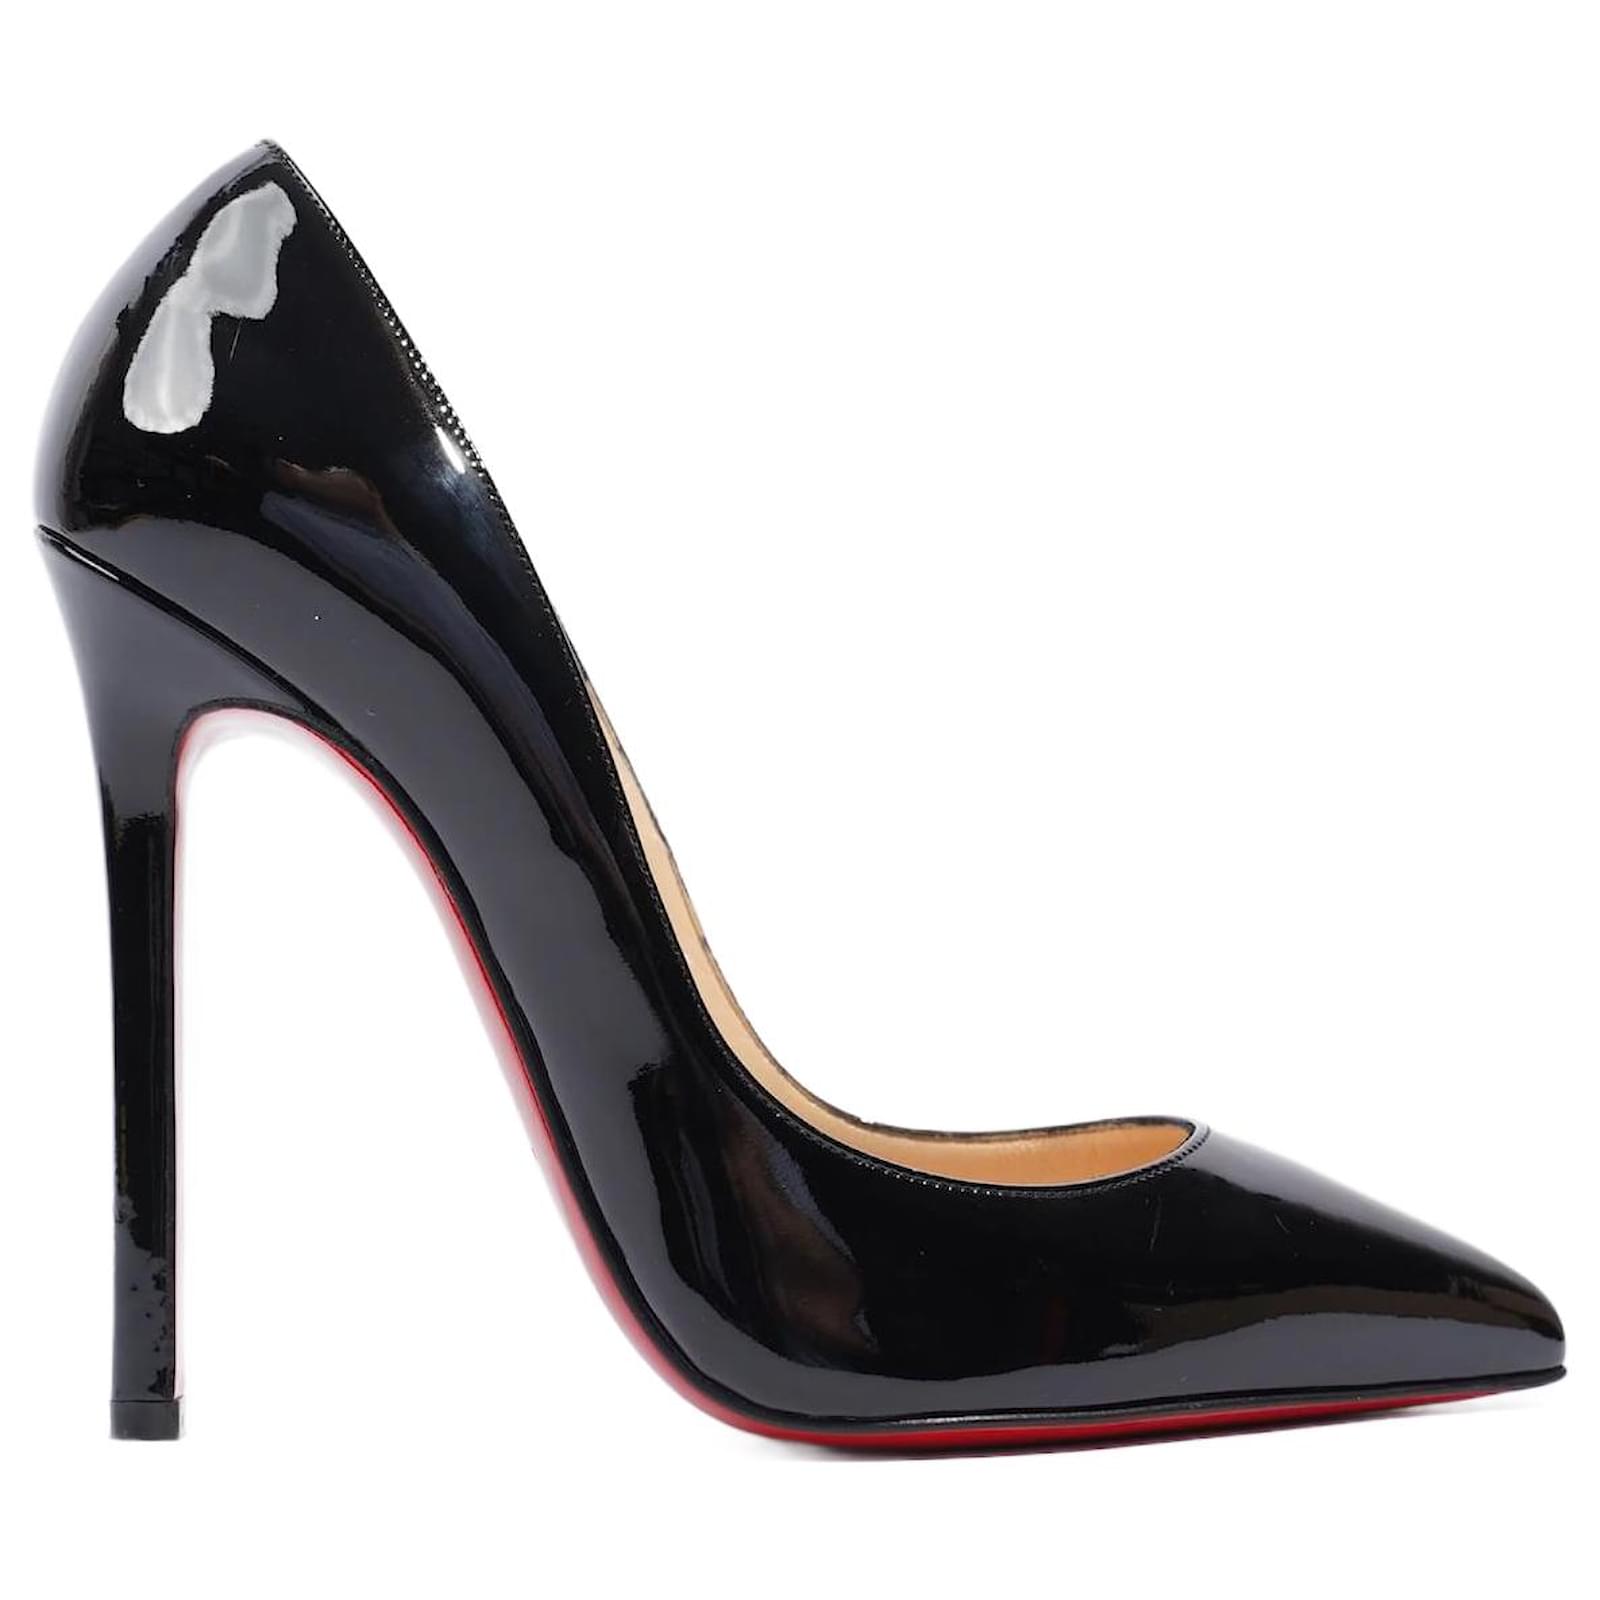 Christian Louboutin So Kate 120 Black Patent Leather Pumps Heels (Size 35.5)